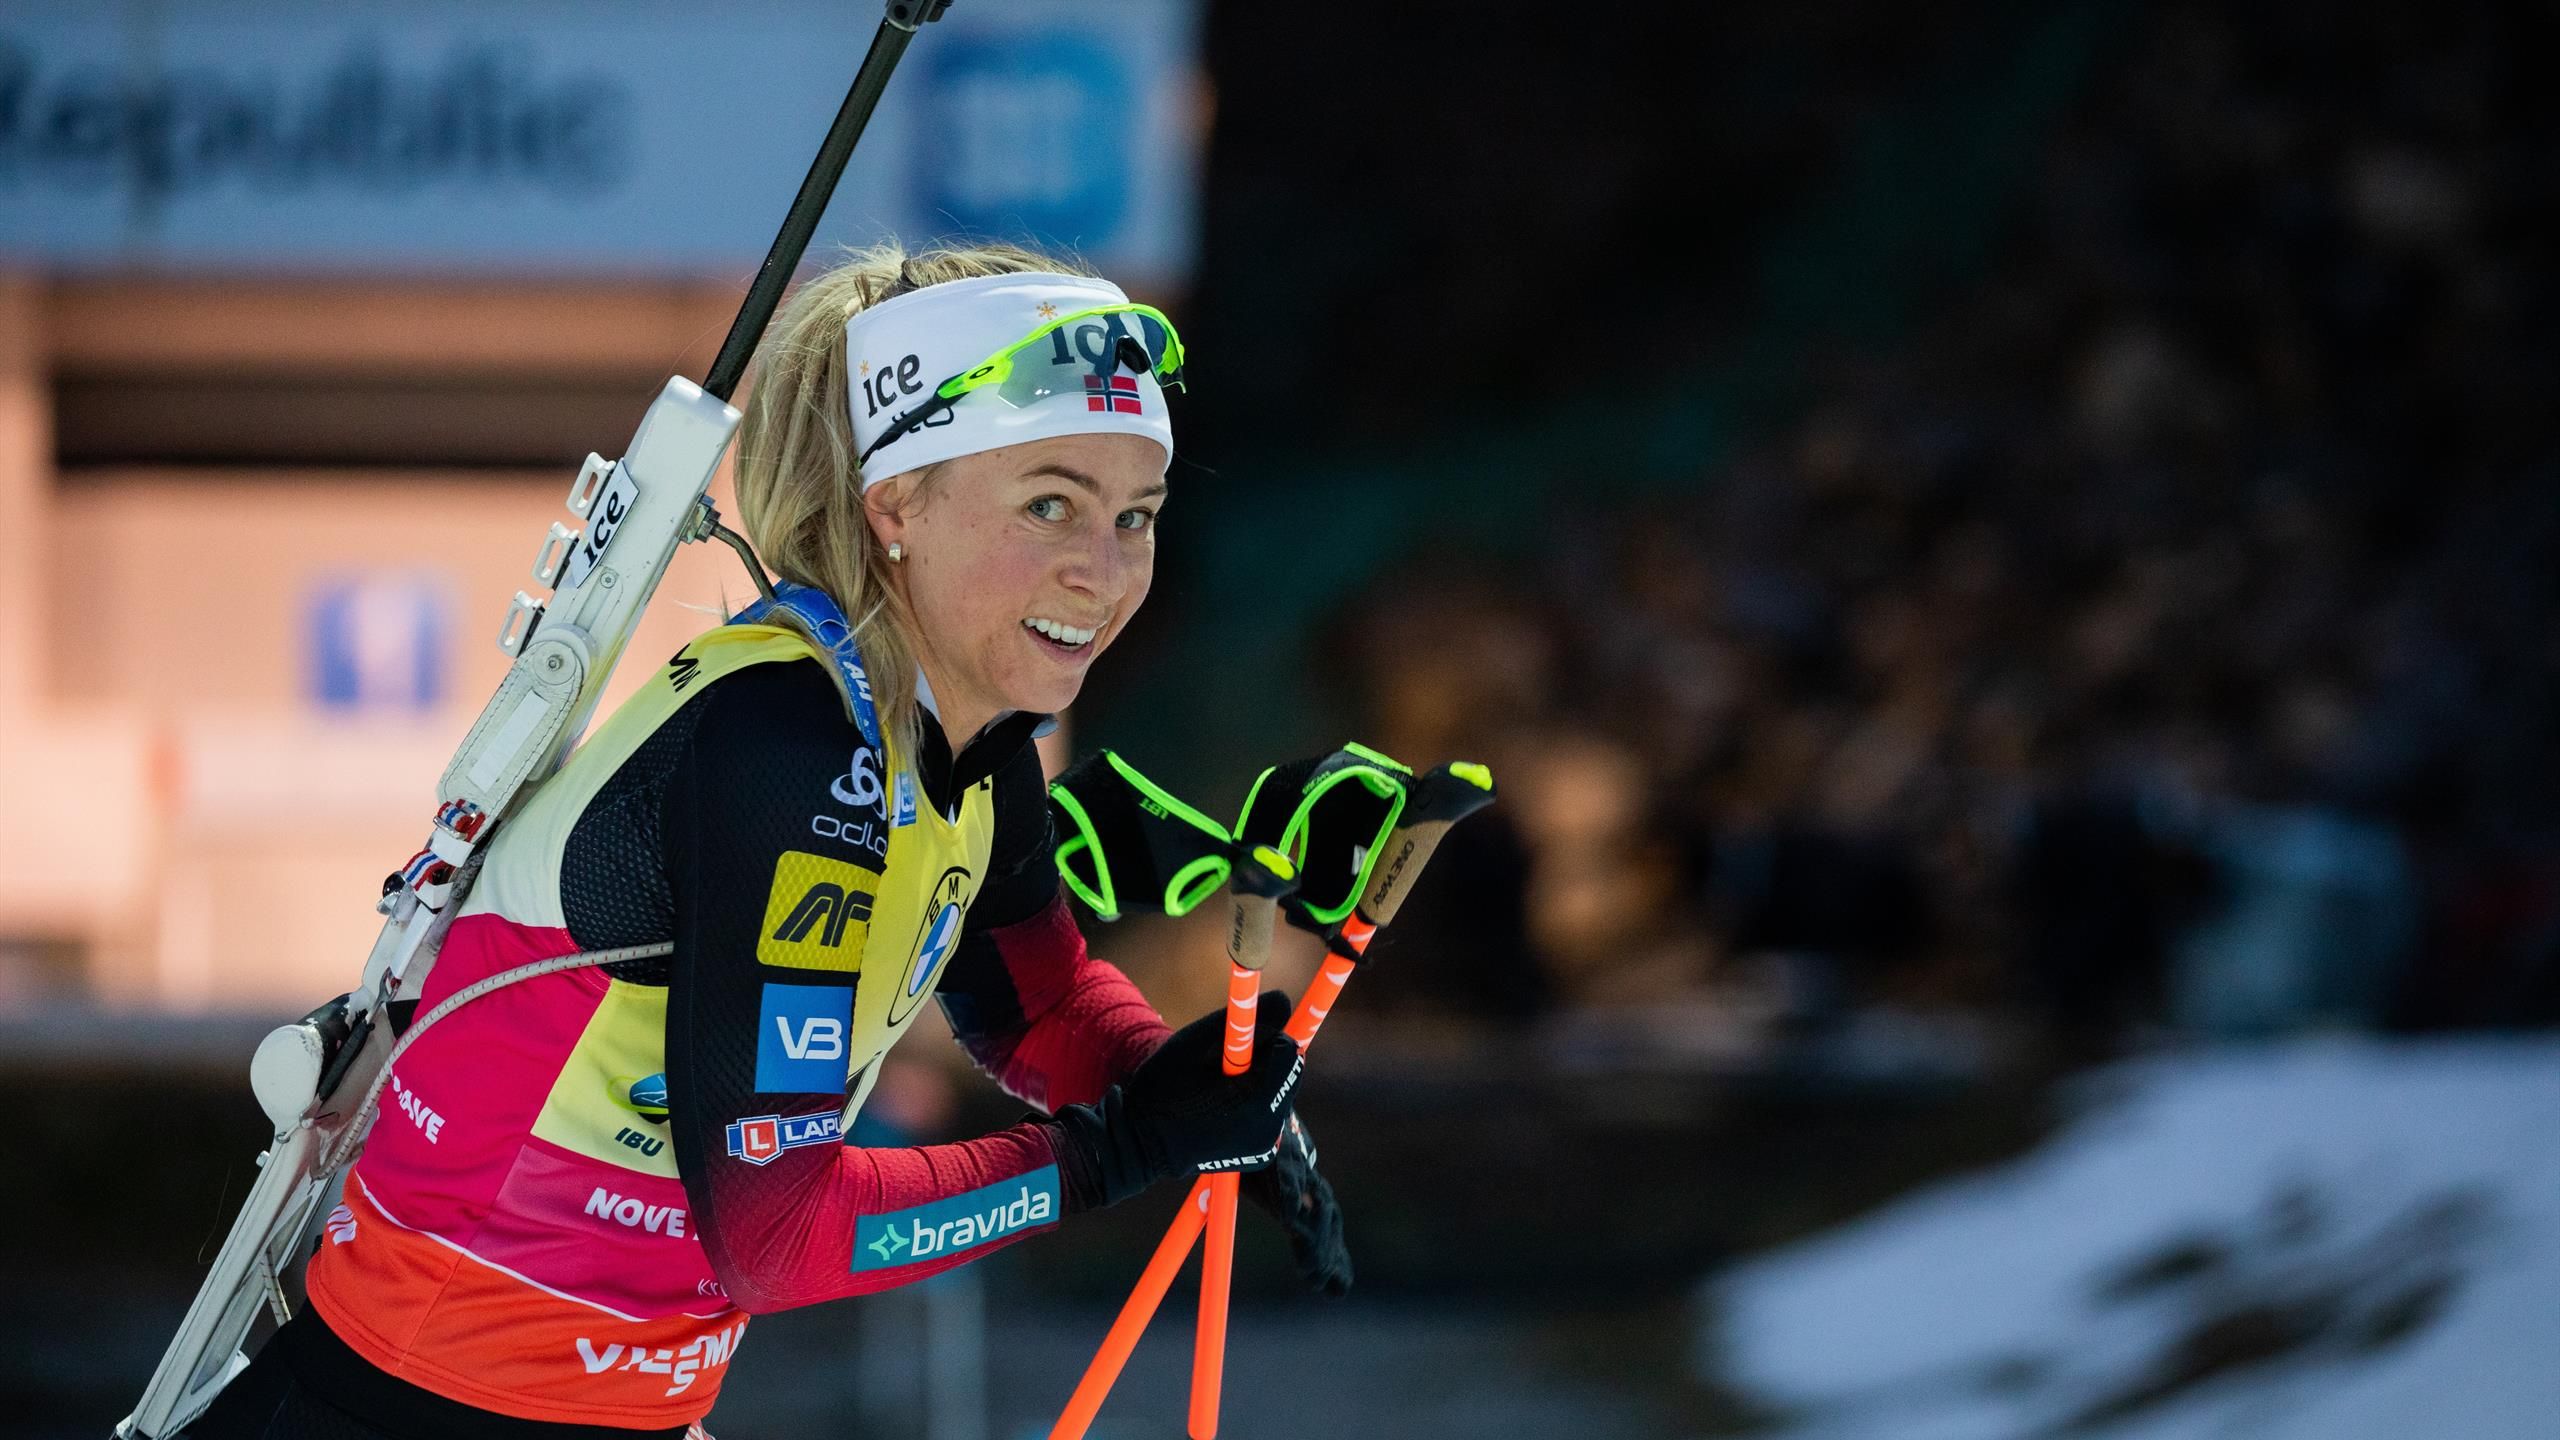 Seventh heaven for sprint queen Tiril Eckhoff who takes biathlon glory in 200th World Cup start